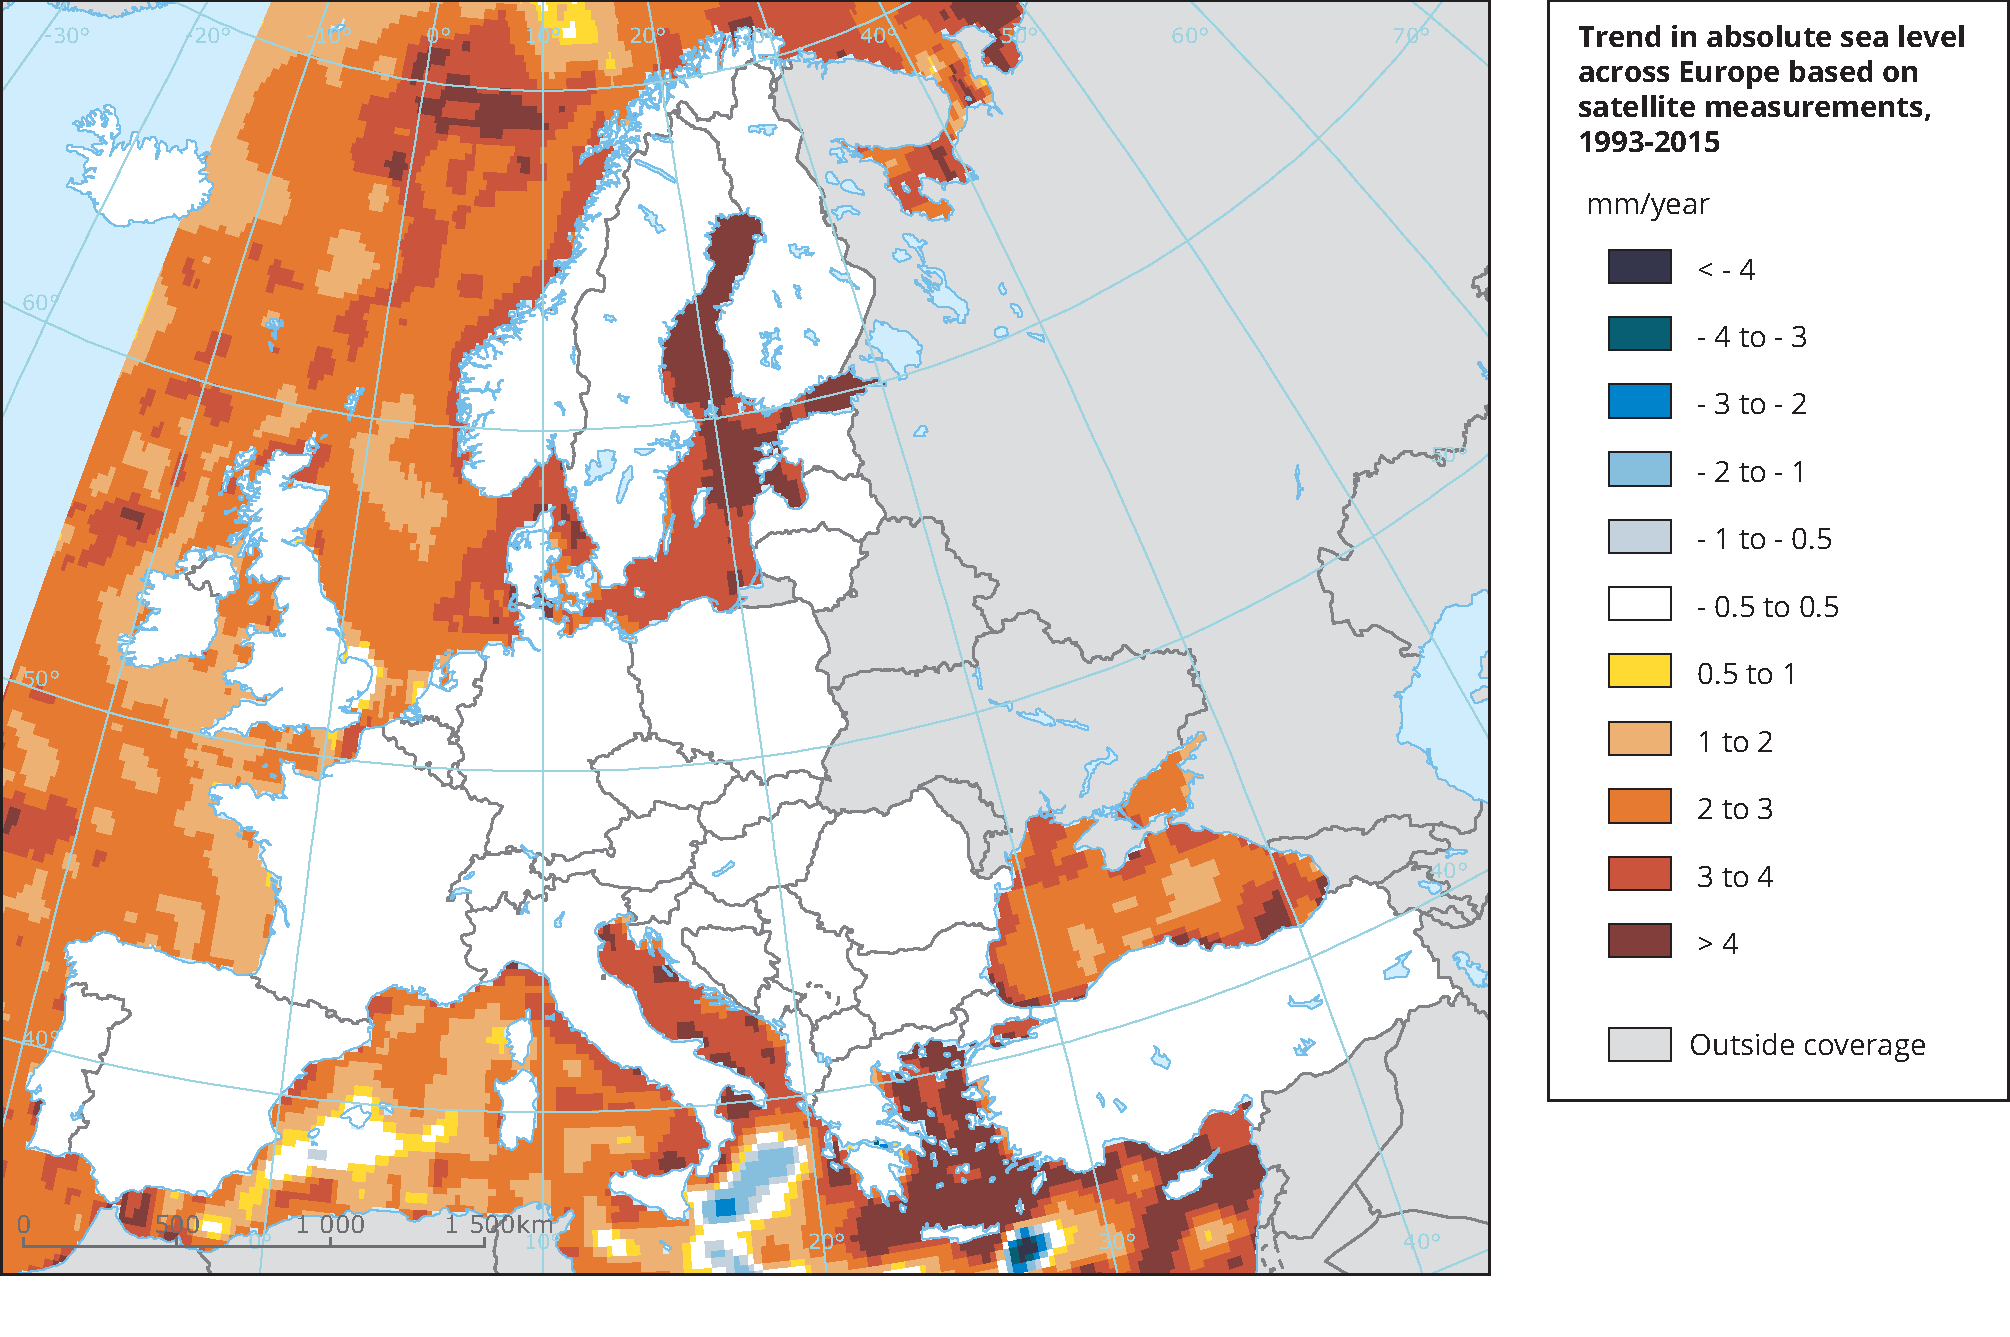 Trend in absolute sea level across Europe based on satellite measurements